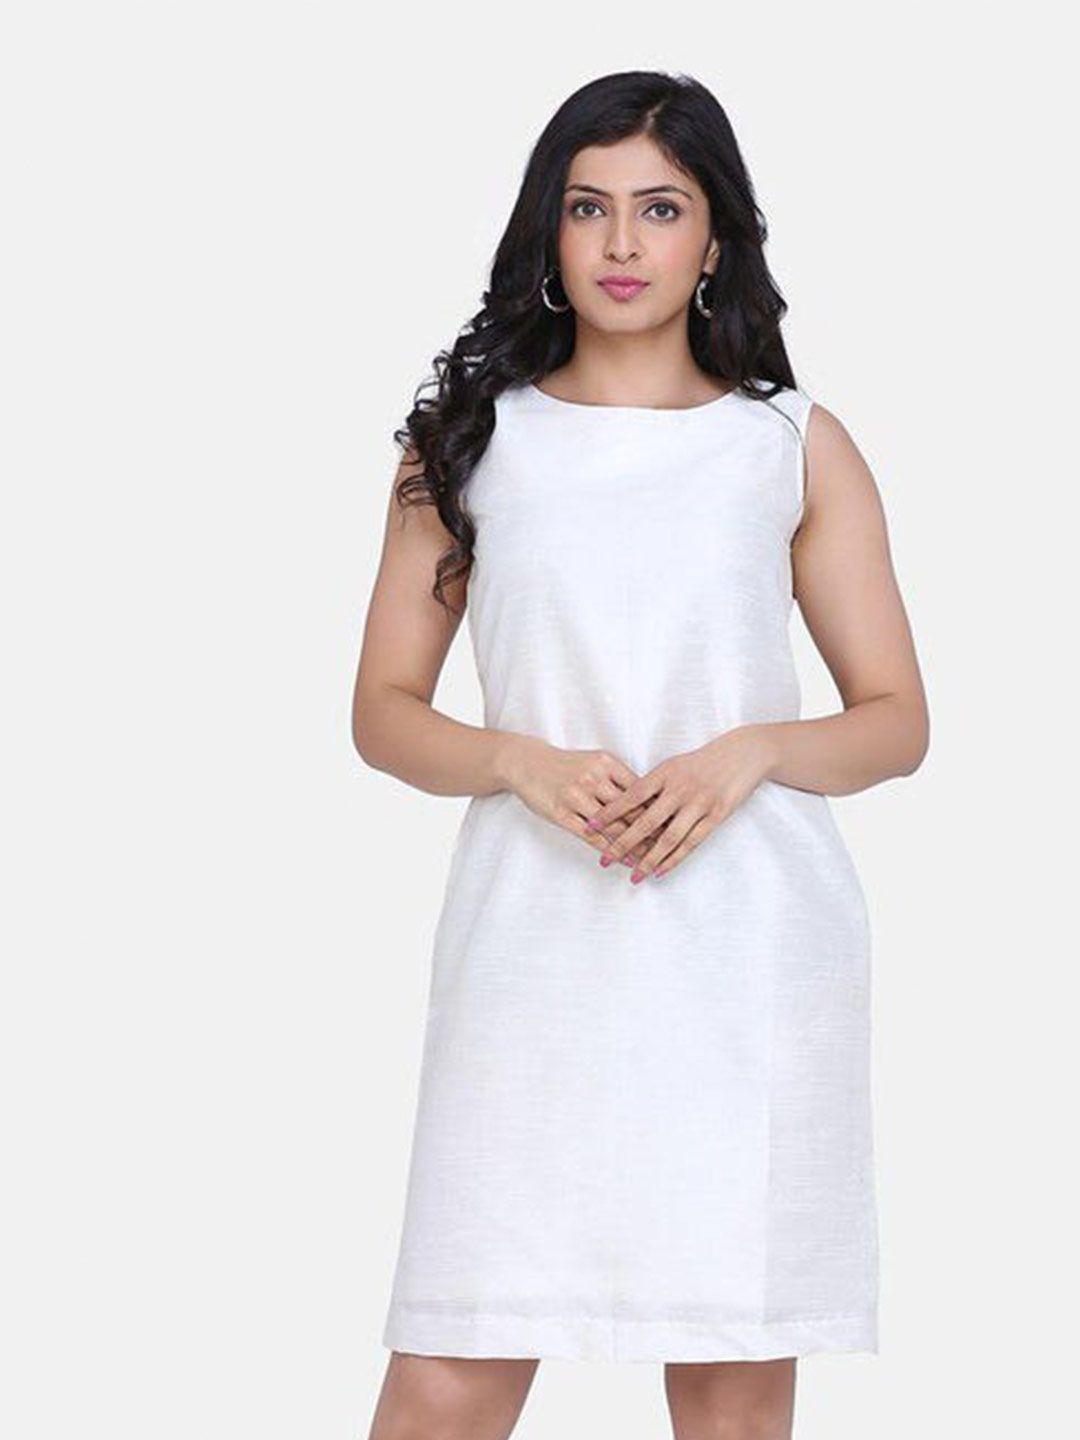 powersutra white solid a-line dress